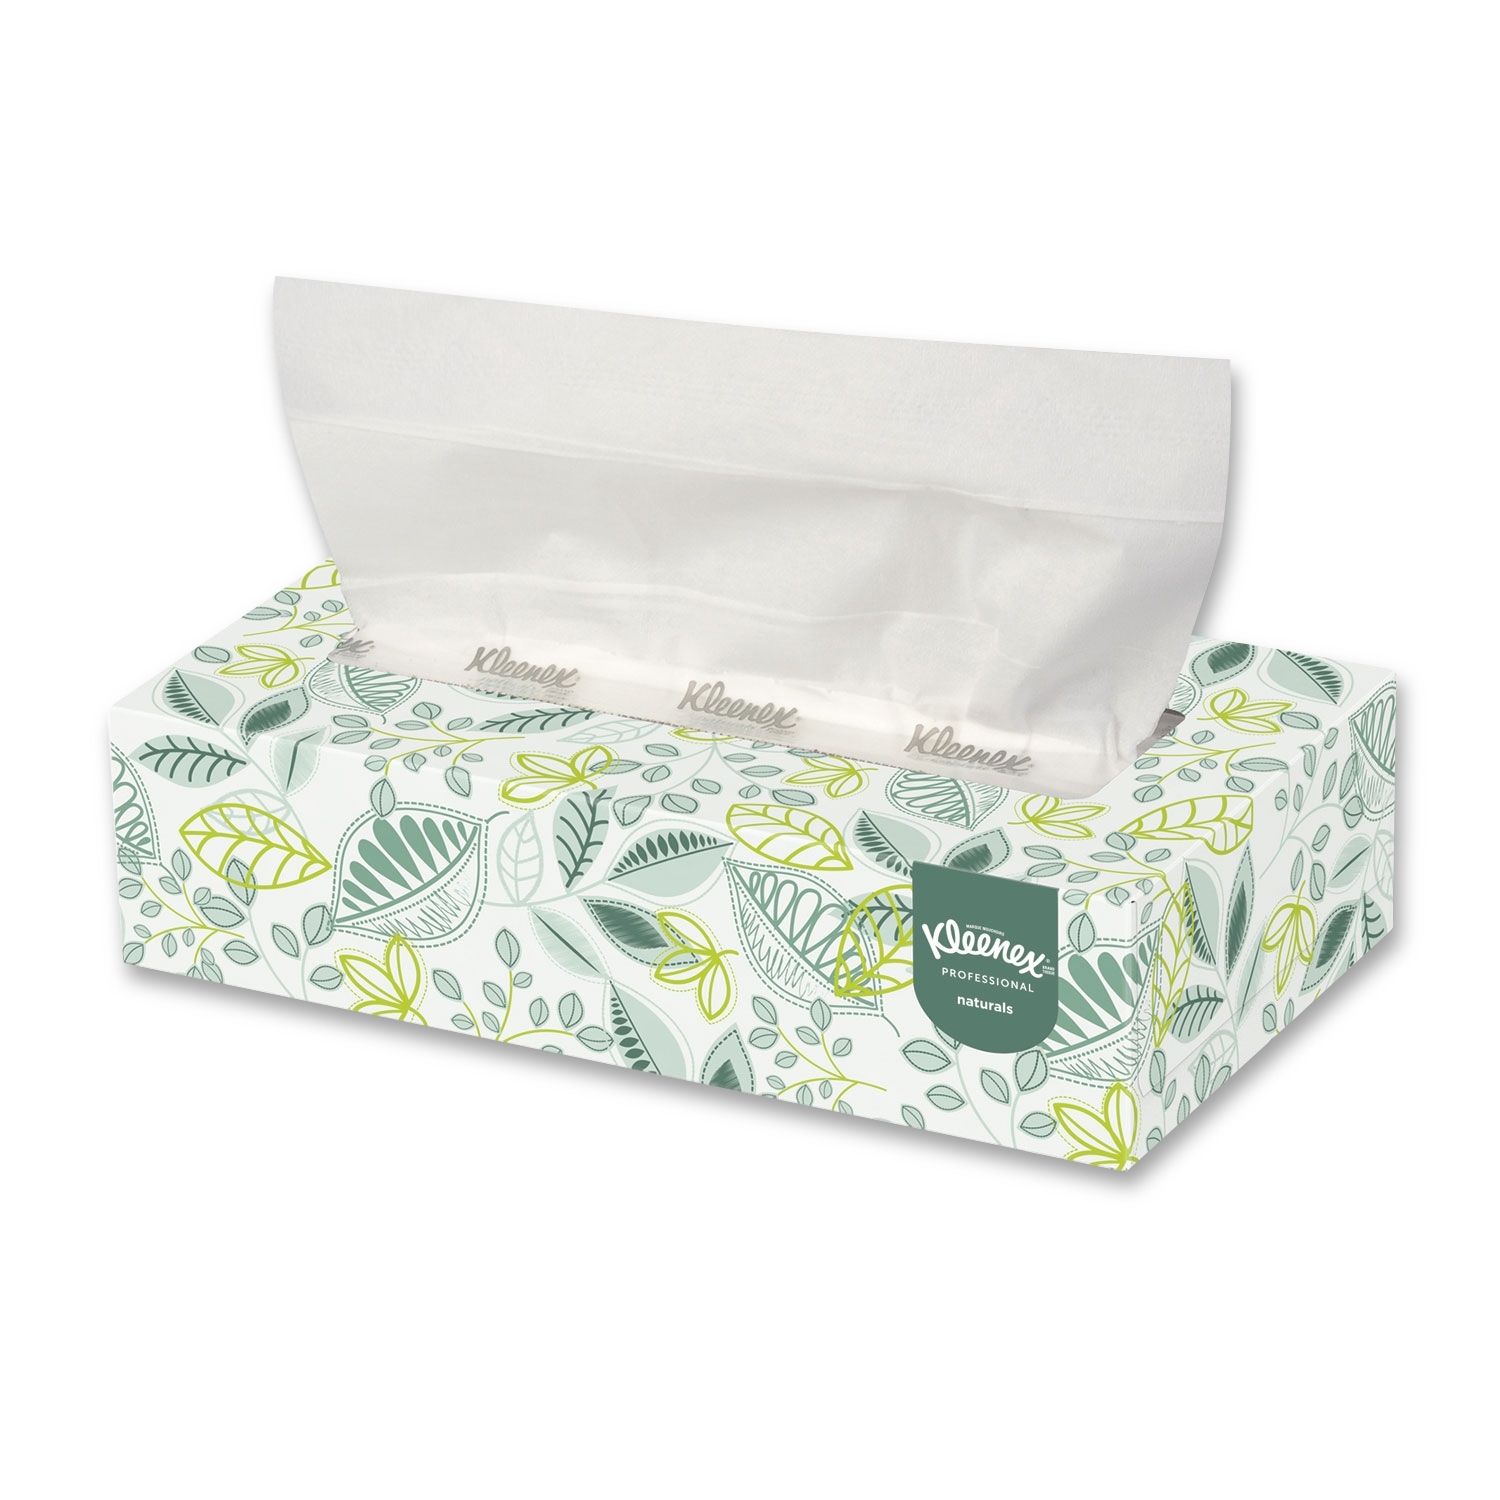 Kleenex Facial 2-Ply Tissue, White - 6 pack, 95 sheets each